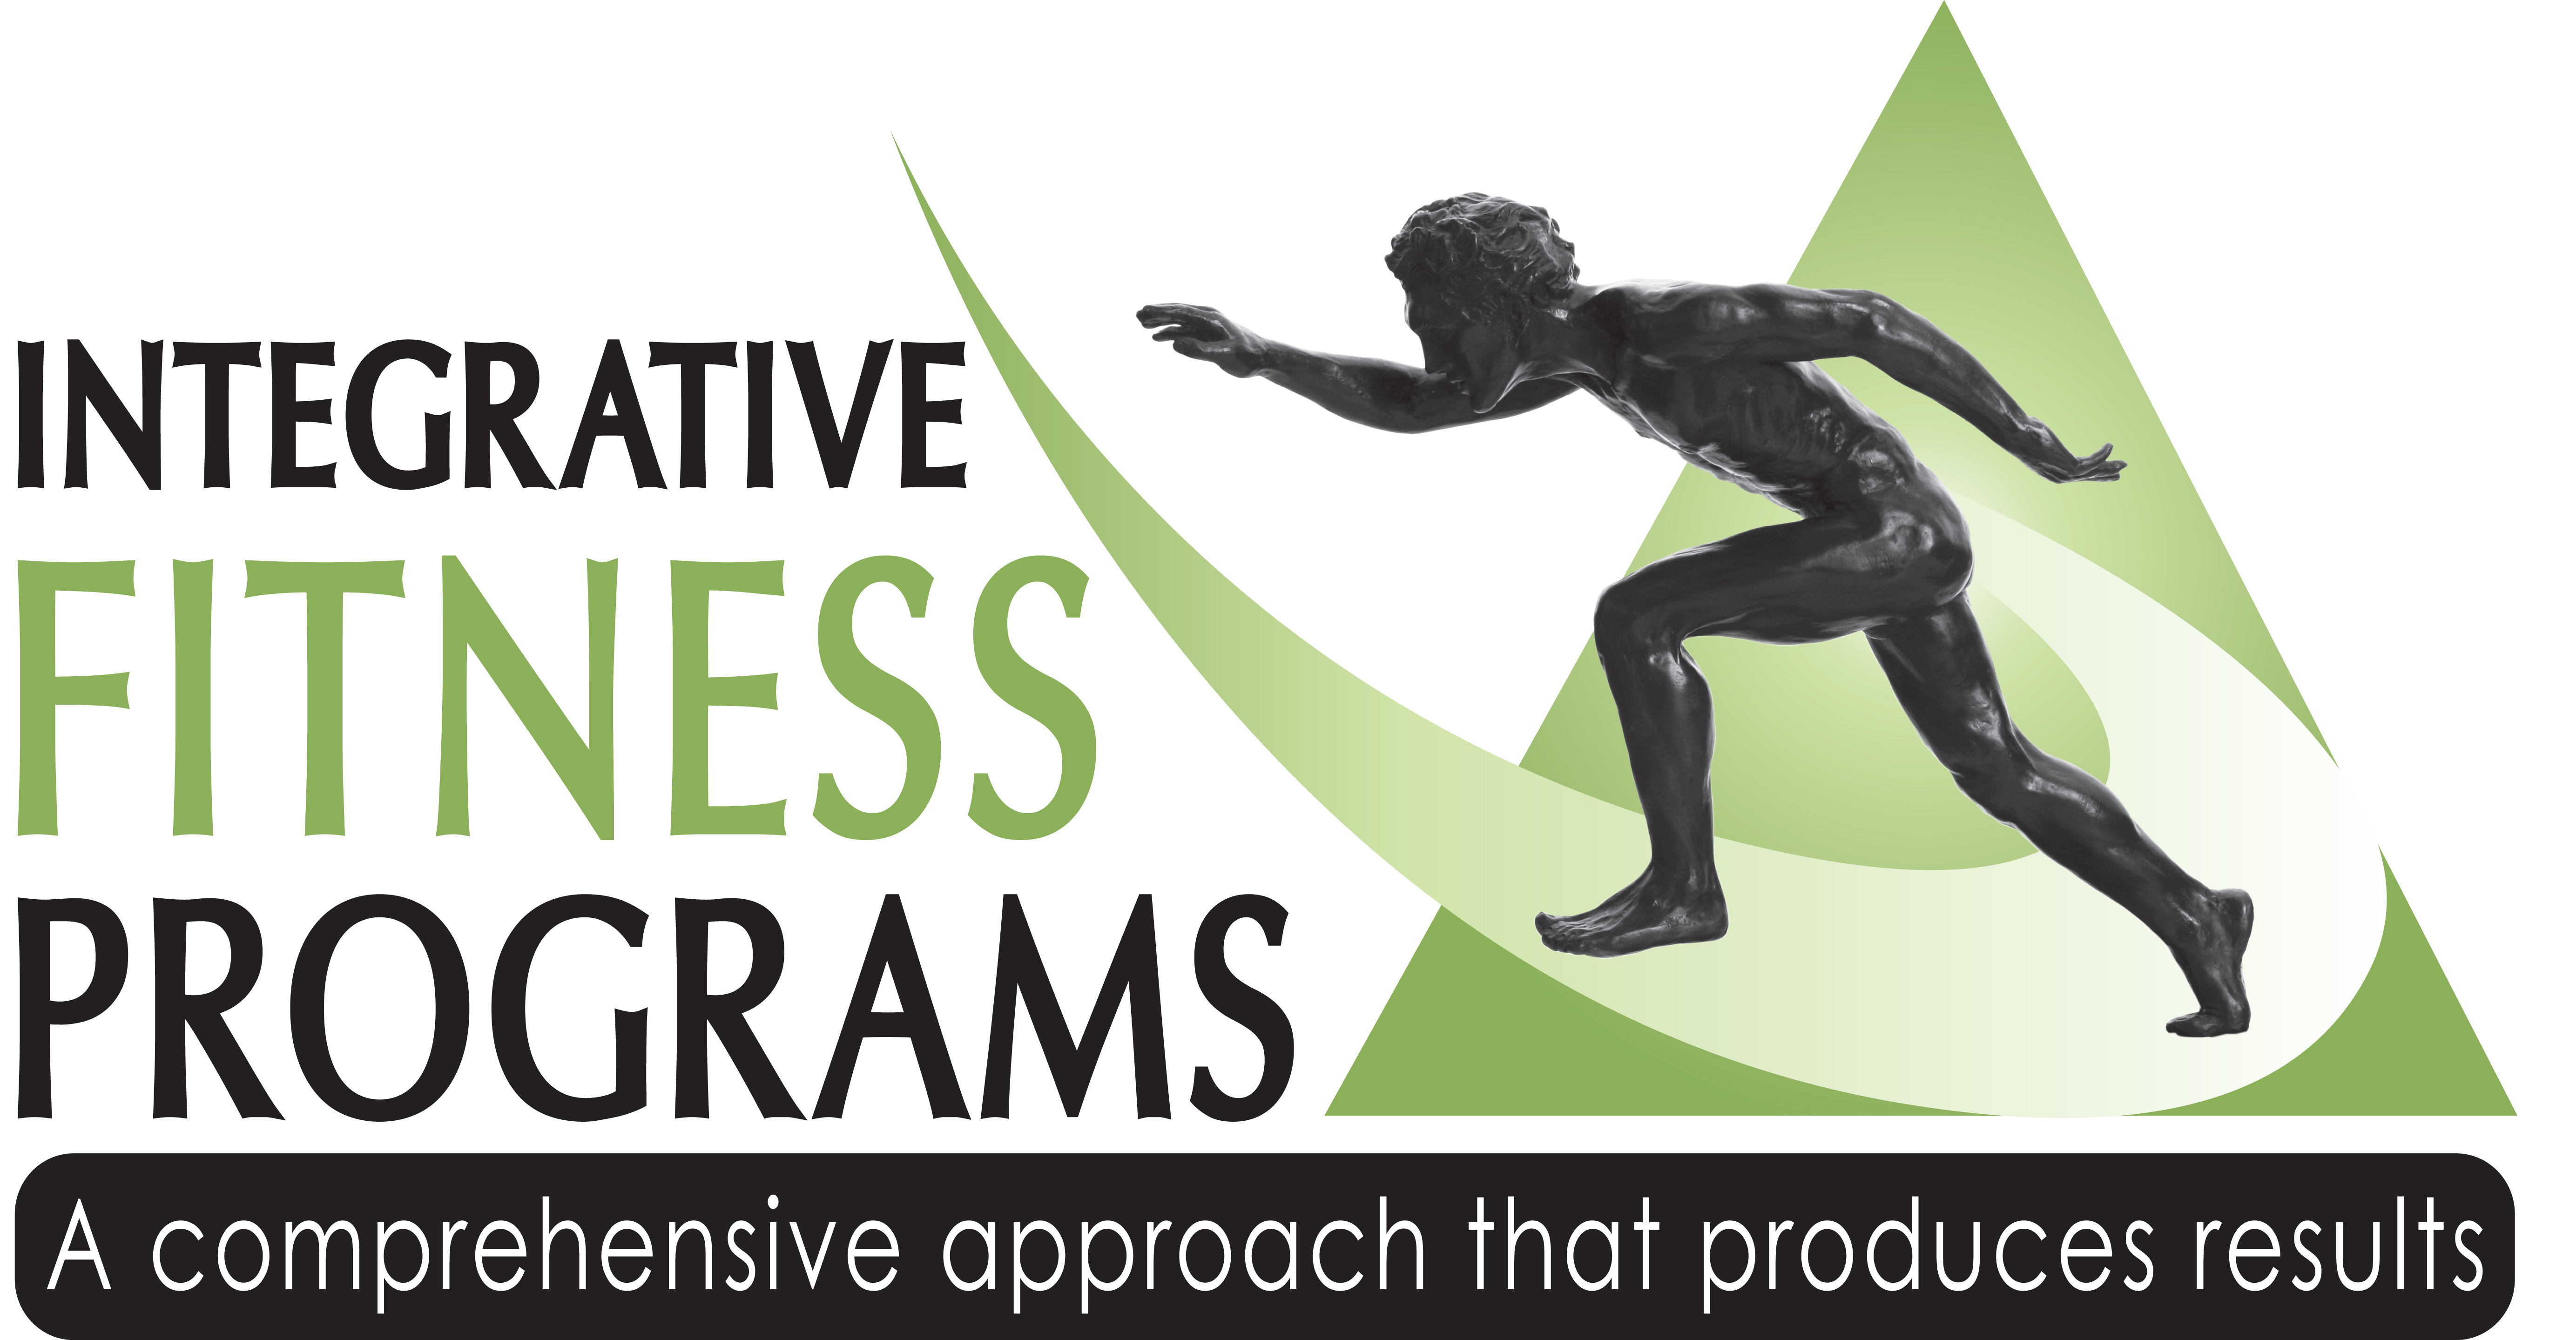 Integrative Fitness Programs, 360 Web Designs, May Featured Client